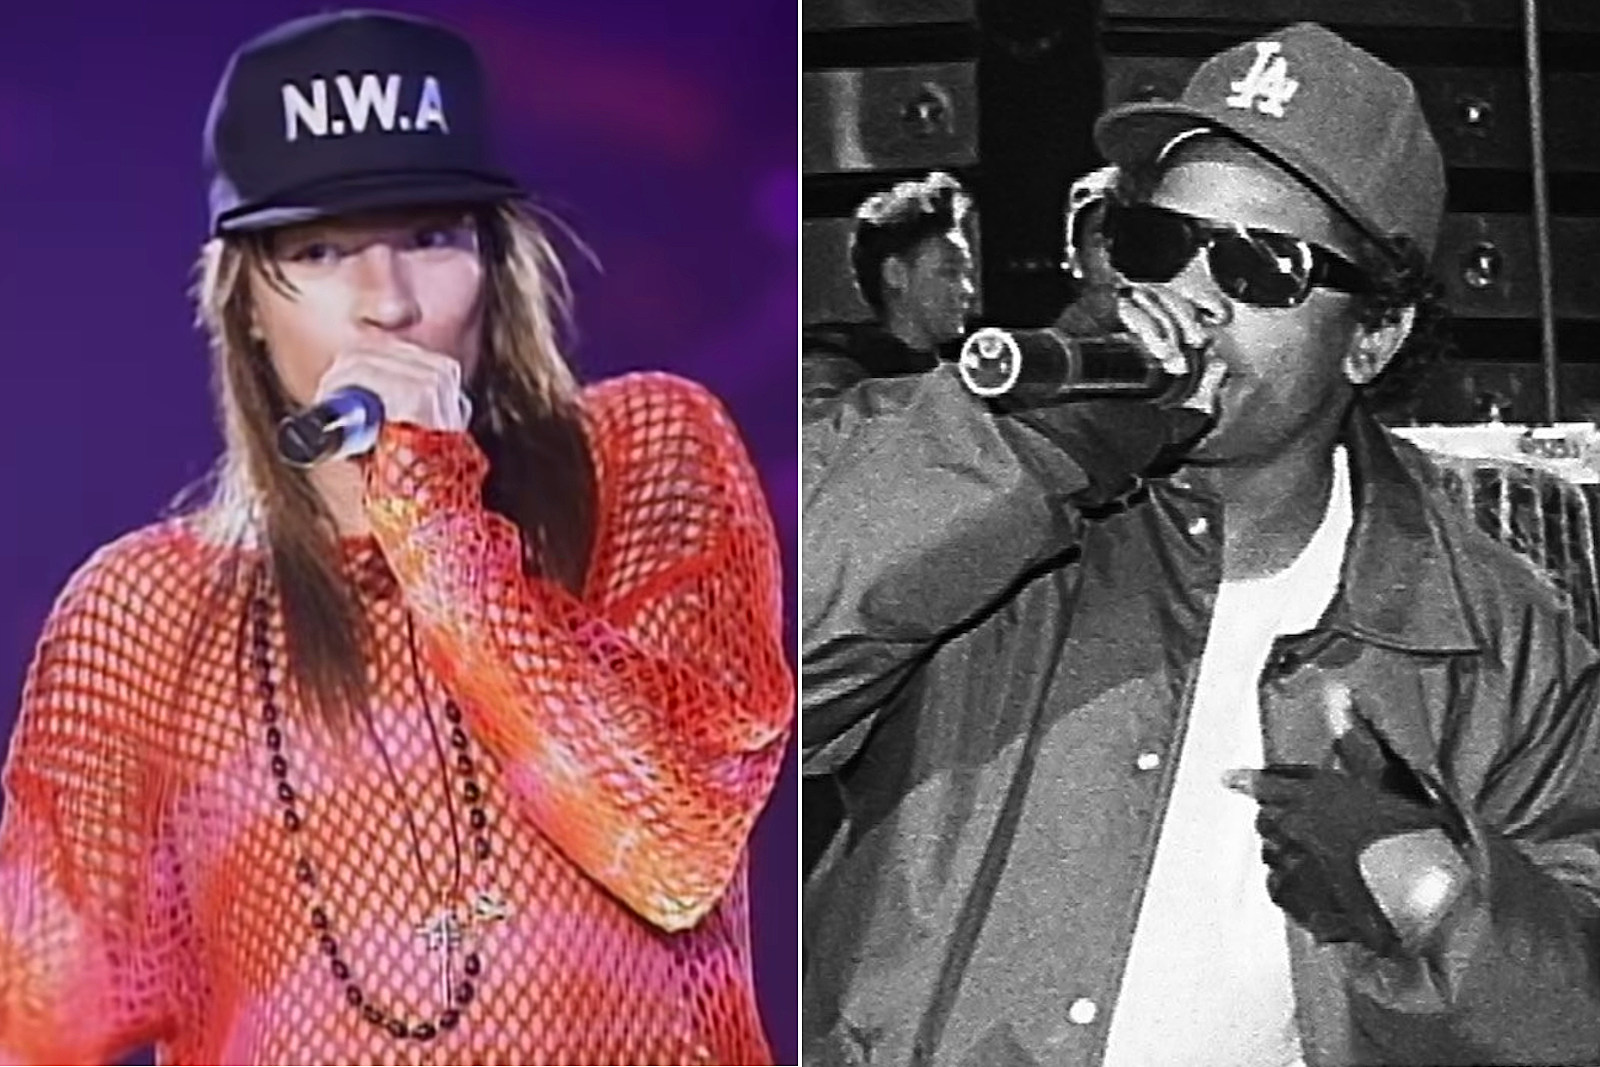 The Unlikely Friendship Between Guns N' Roses and N.W.A